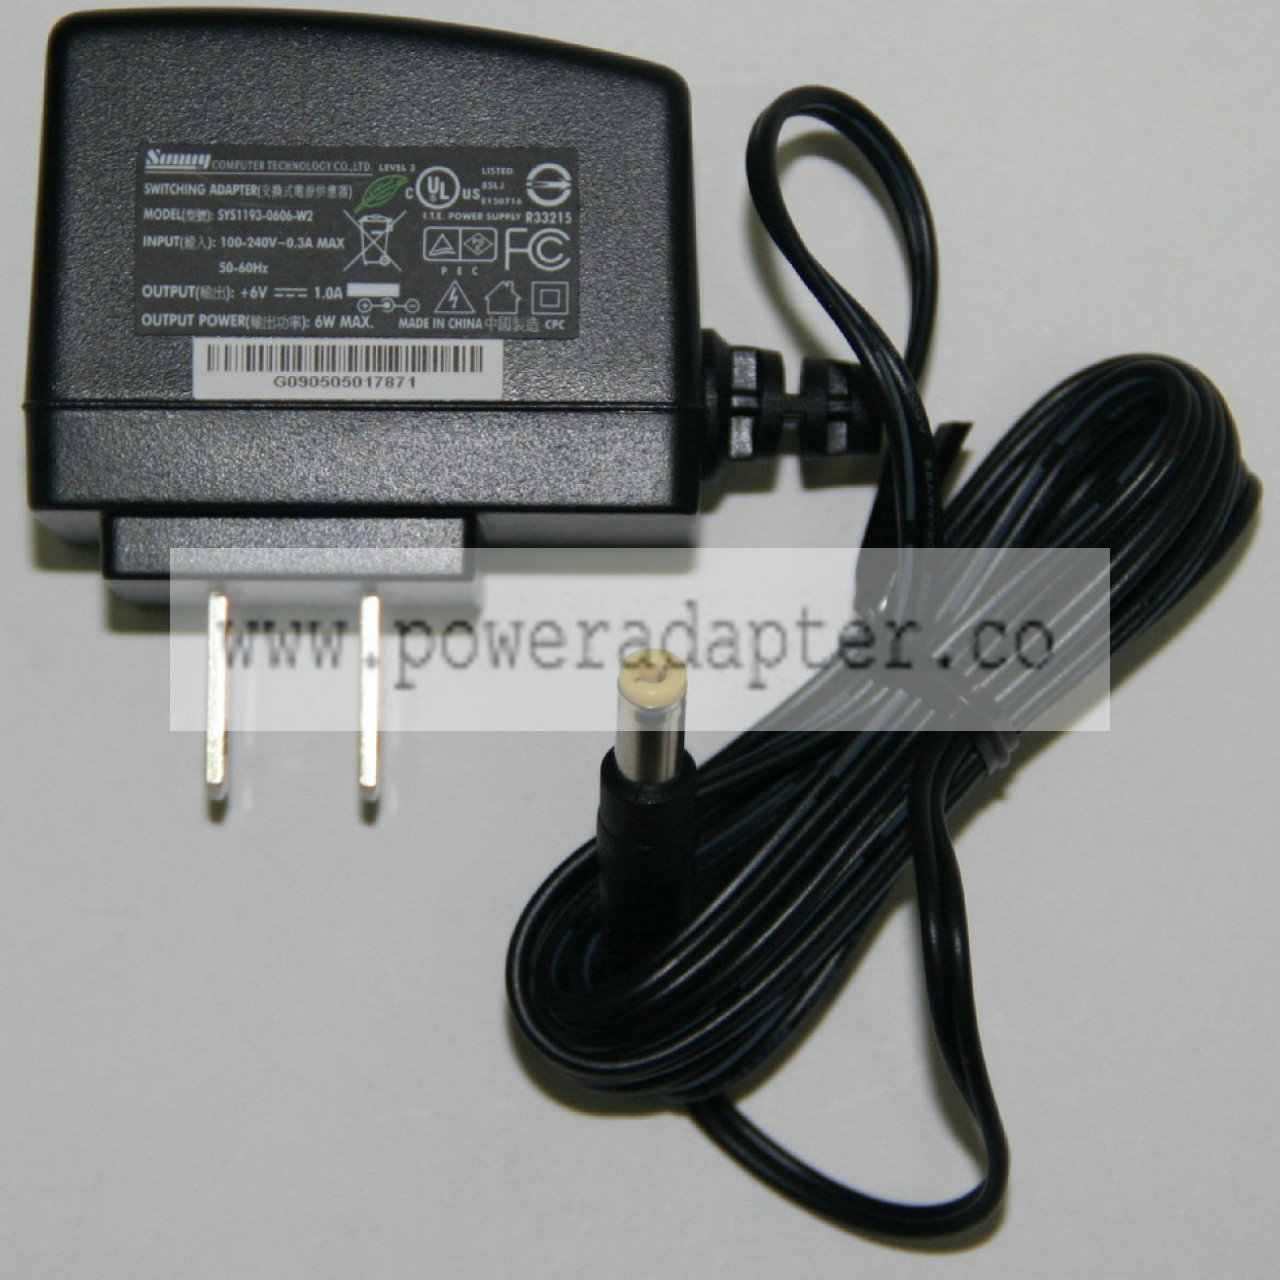 Akai MP12-1 AC Adaptor for MPC500 (included w/ MPC500 purchase) Product Description Akai MP12-1 replacement AC Adaptor